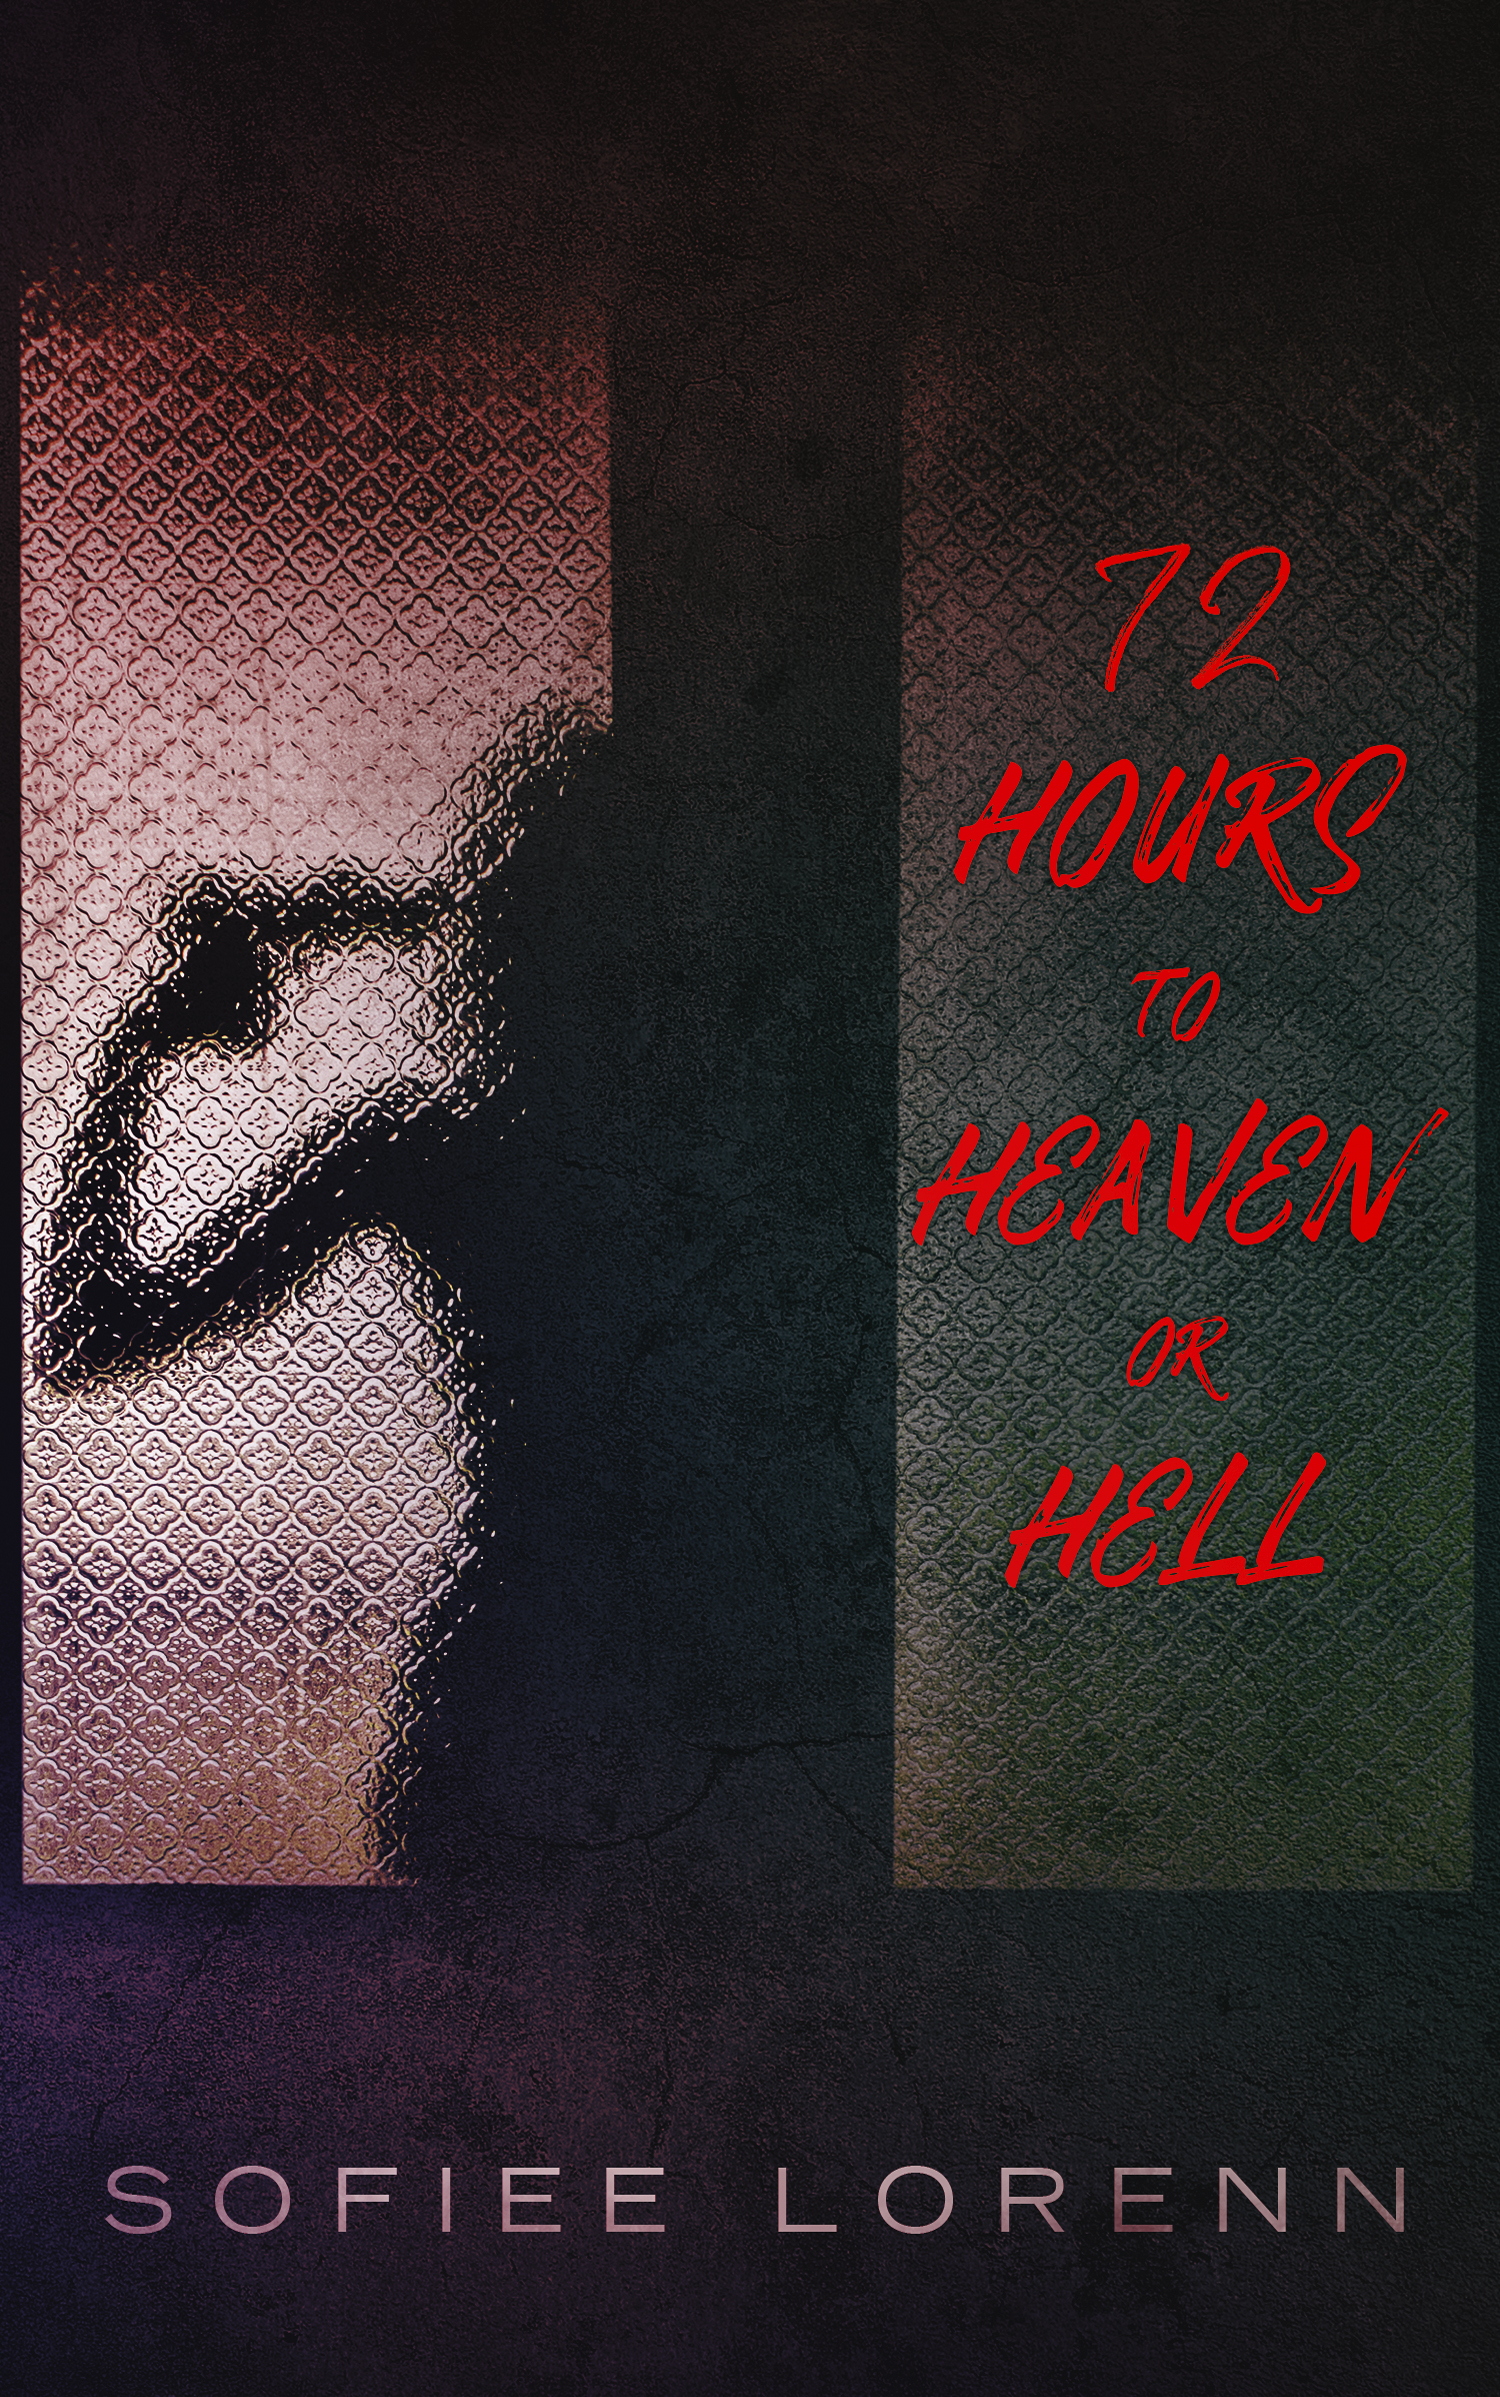 FREE: 72 Hours to heaven or hell by Sofiee Lorenn